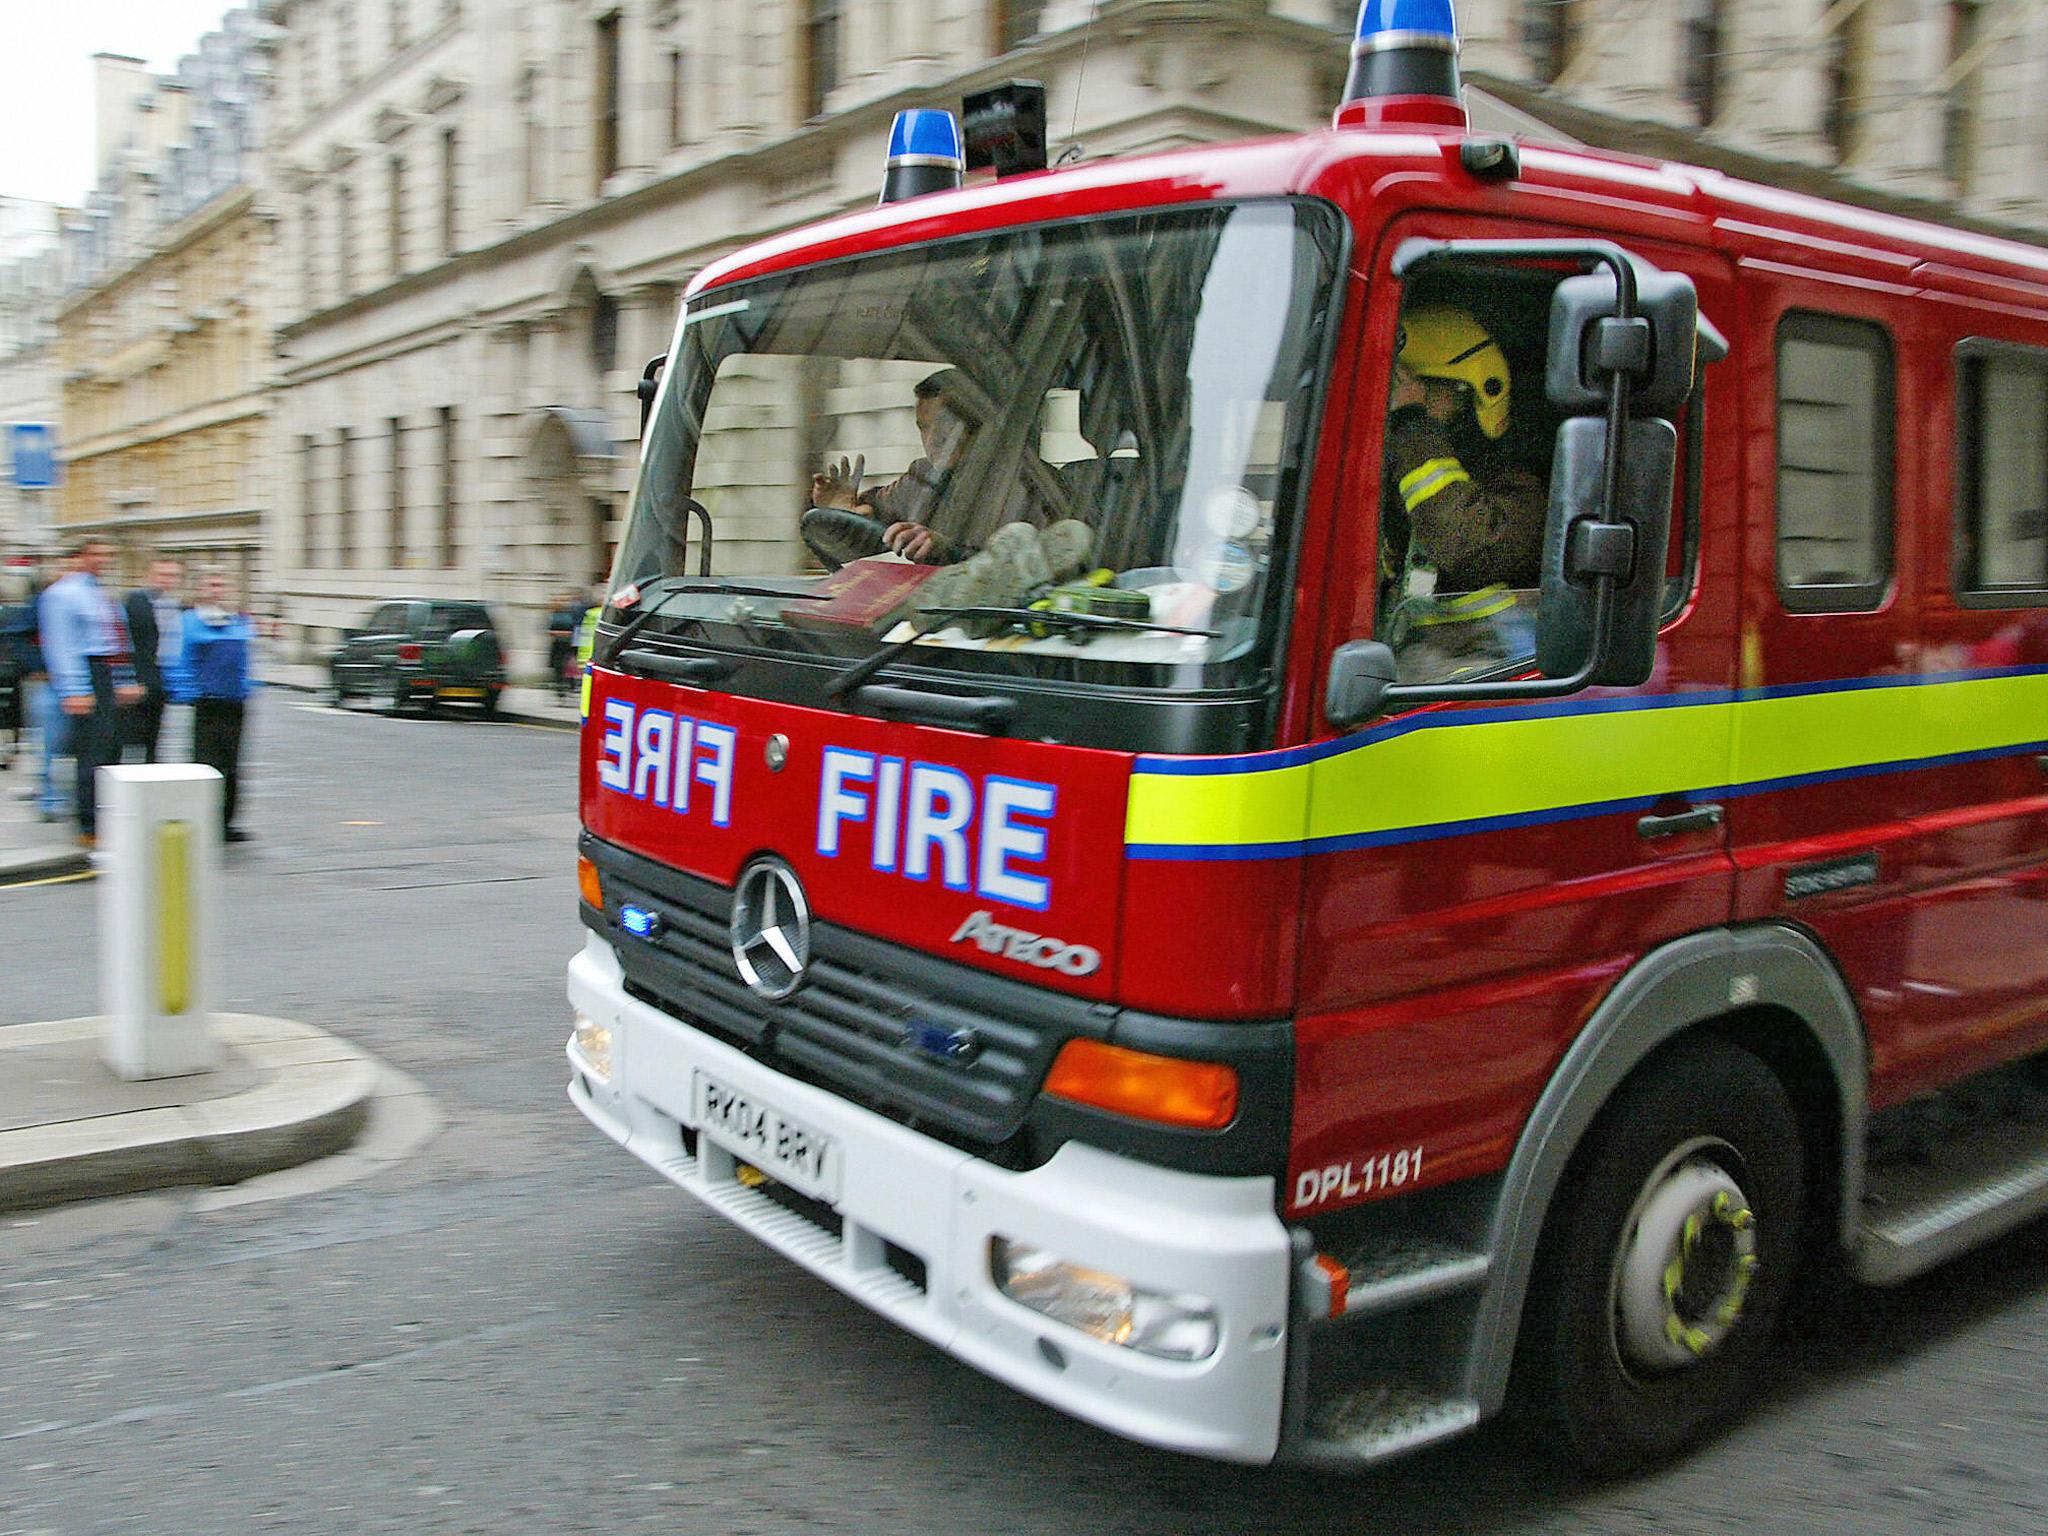 The London Fire Brigade is exploring ways it can use social media